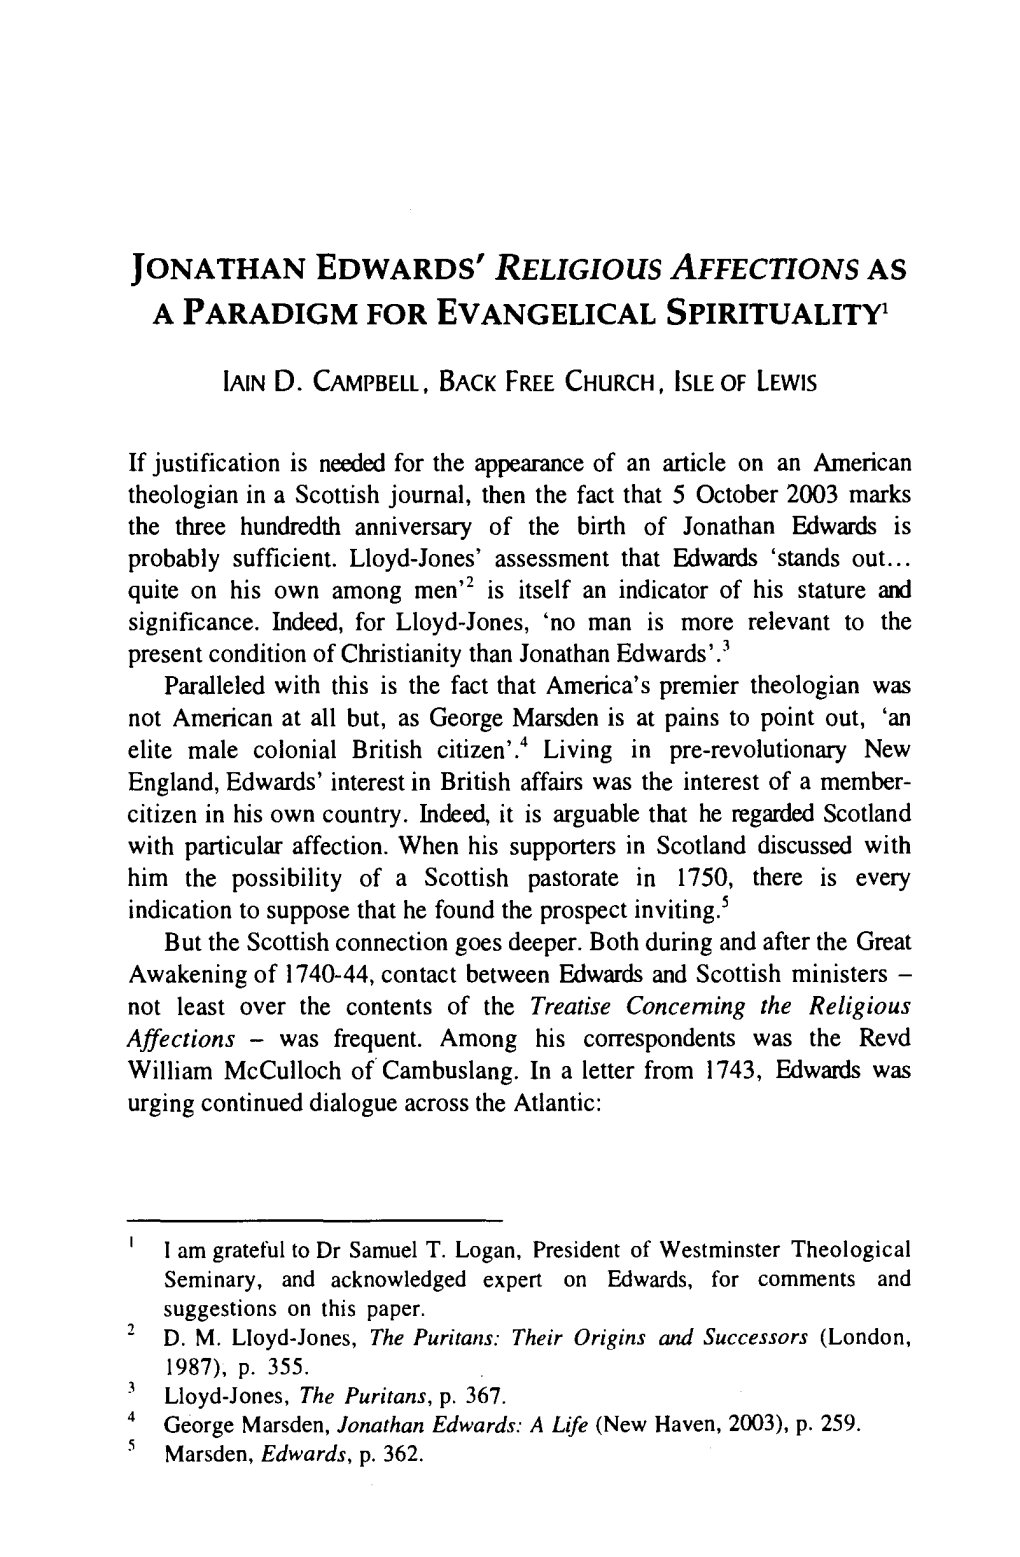 Jonathan Edward's Religious Affections As a Paradigm For